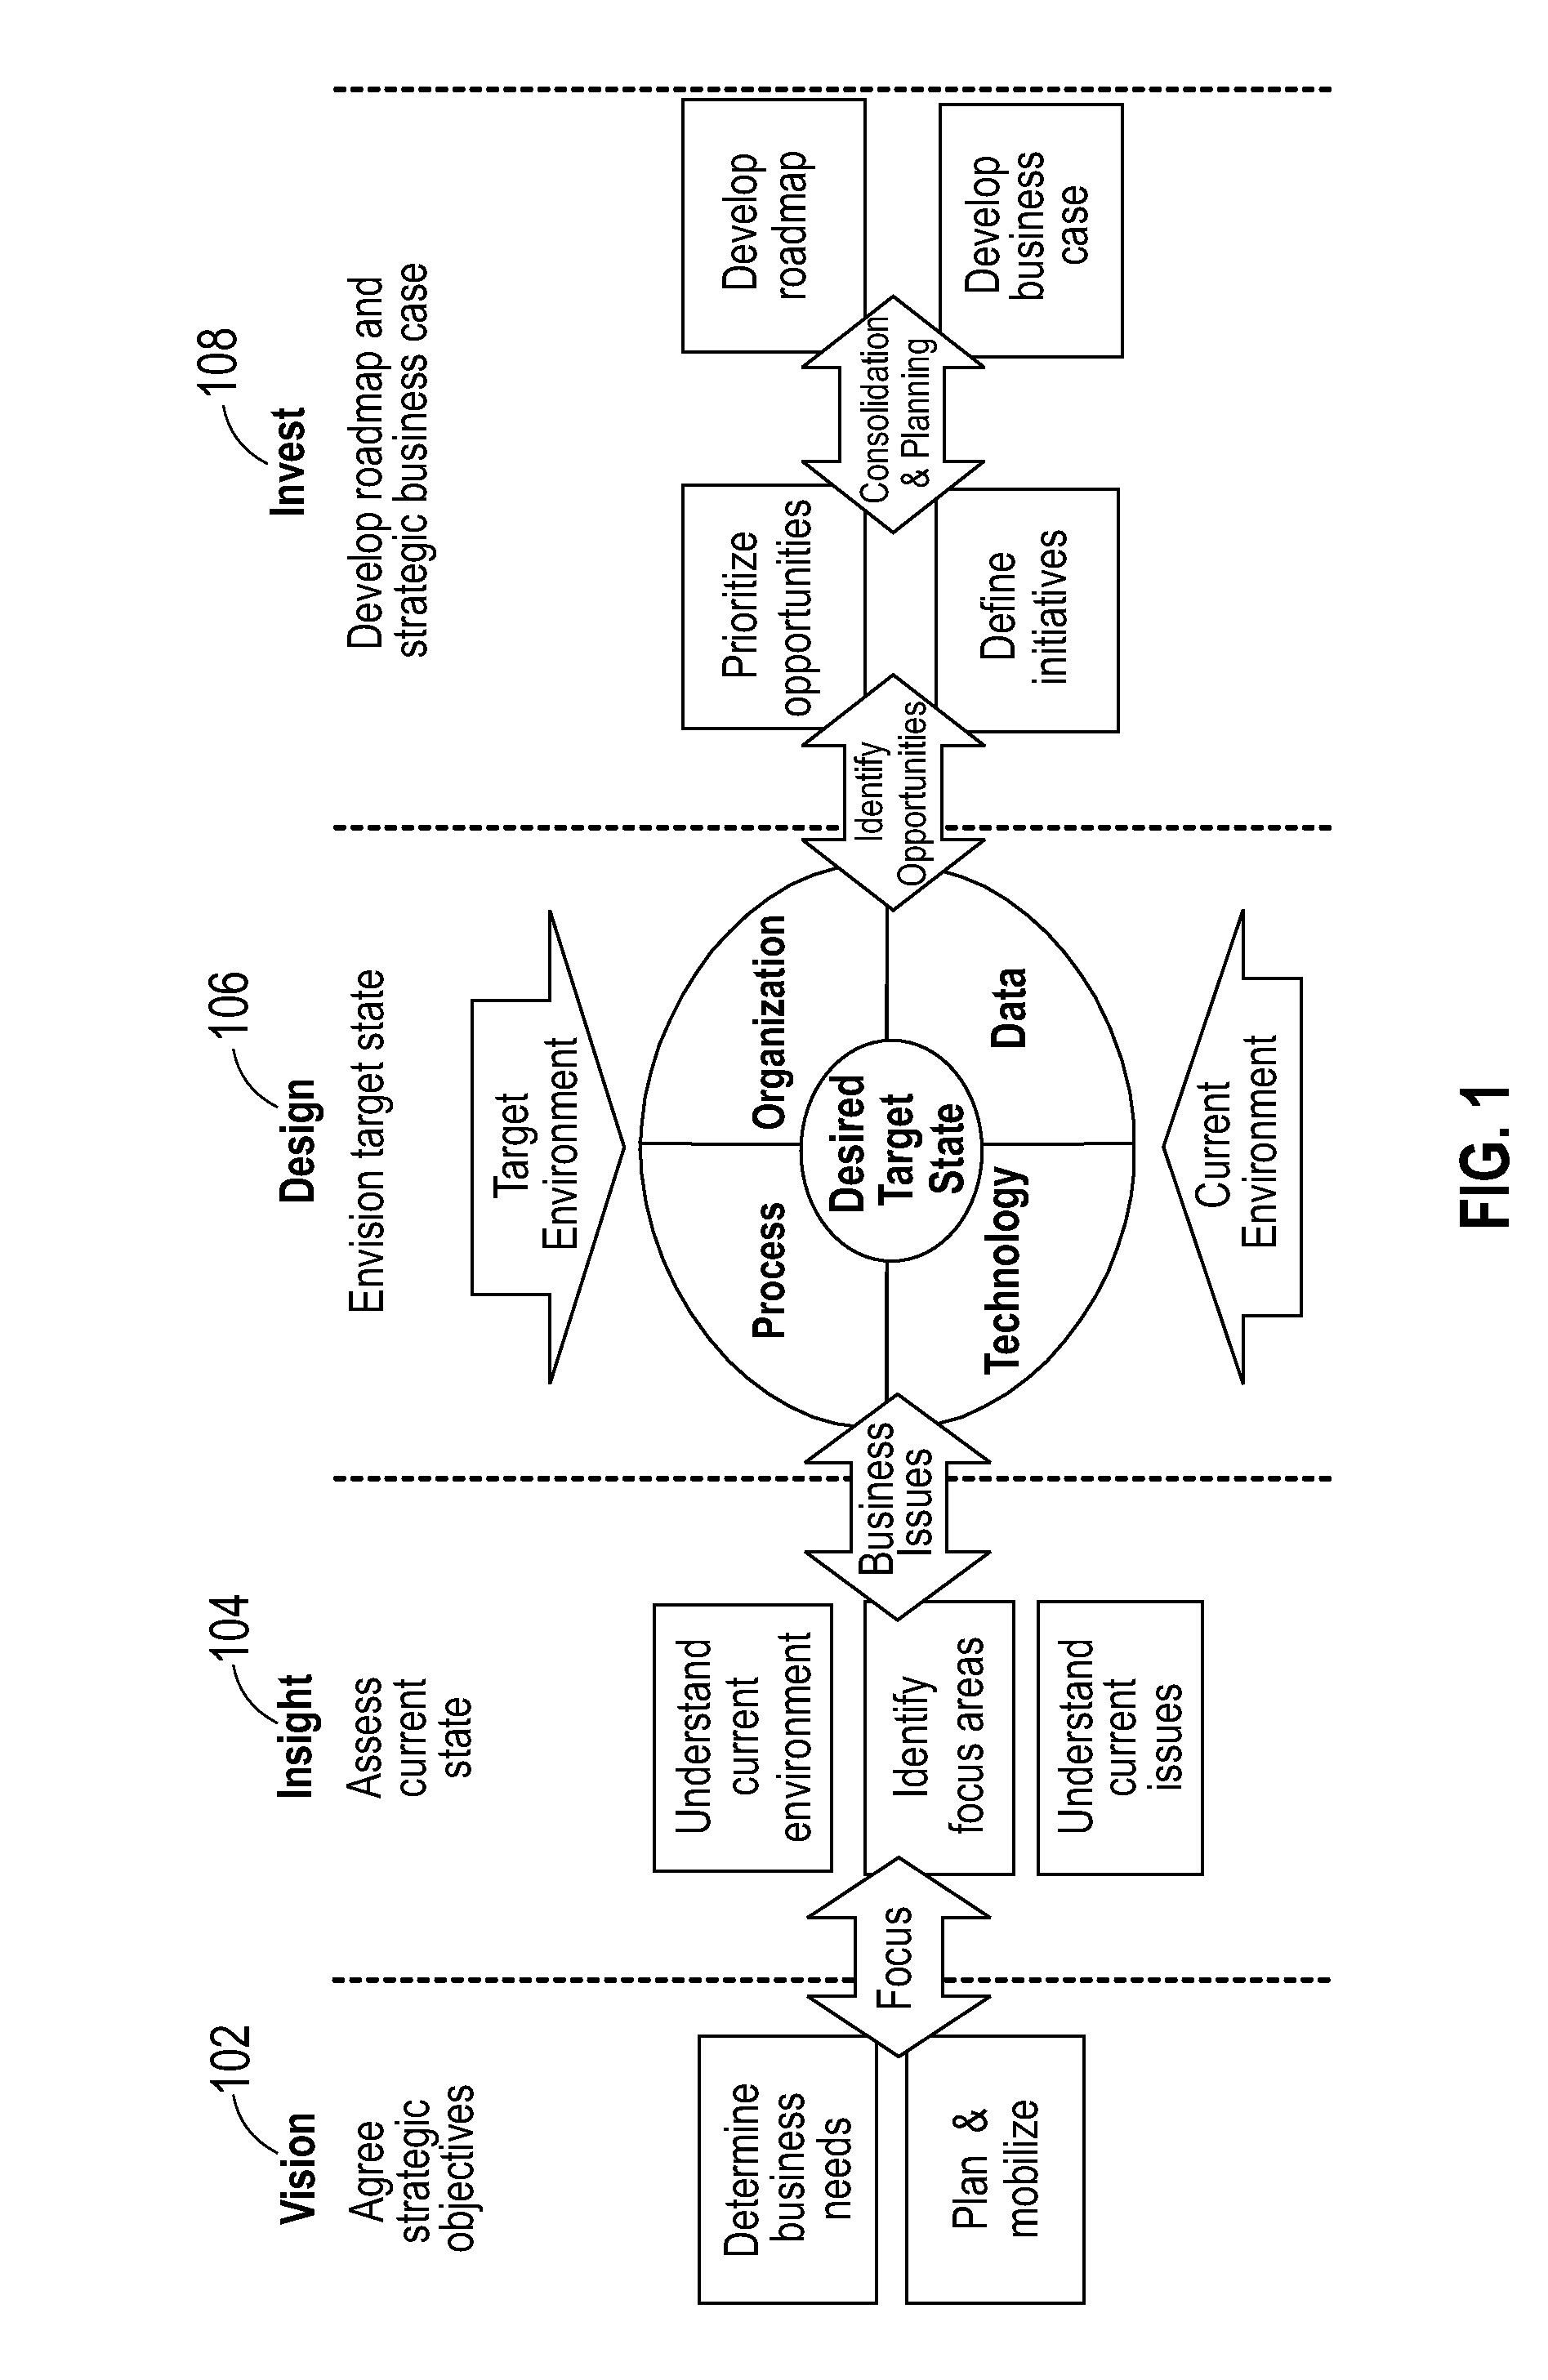 System and method for financial transformation